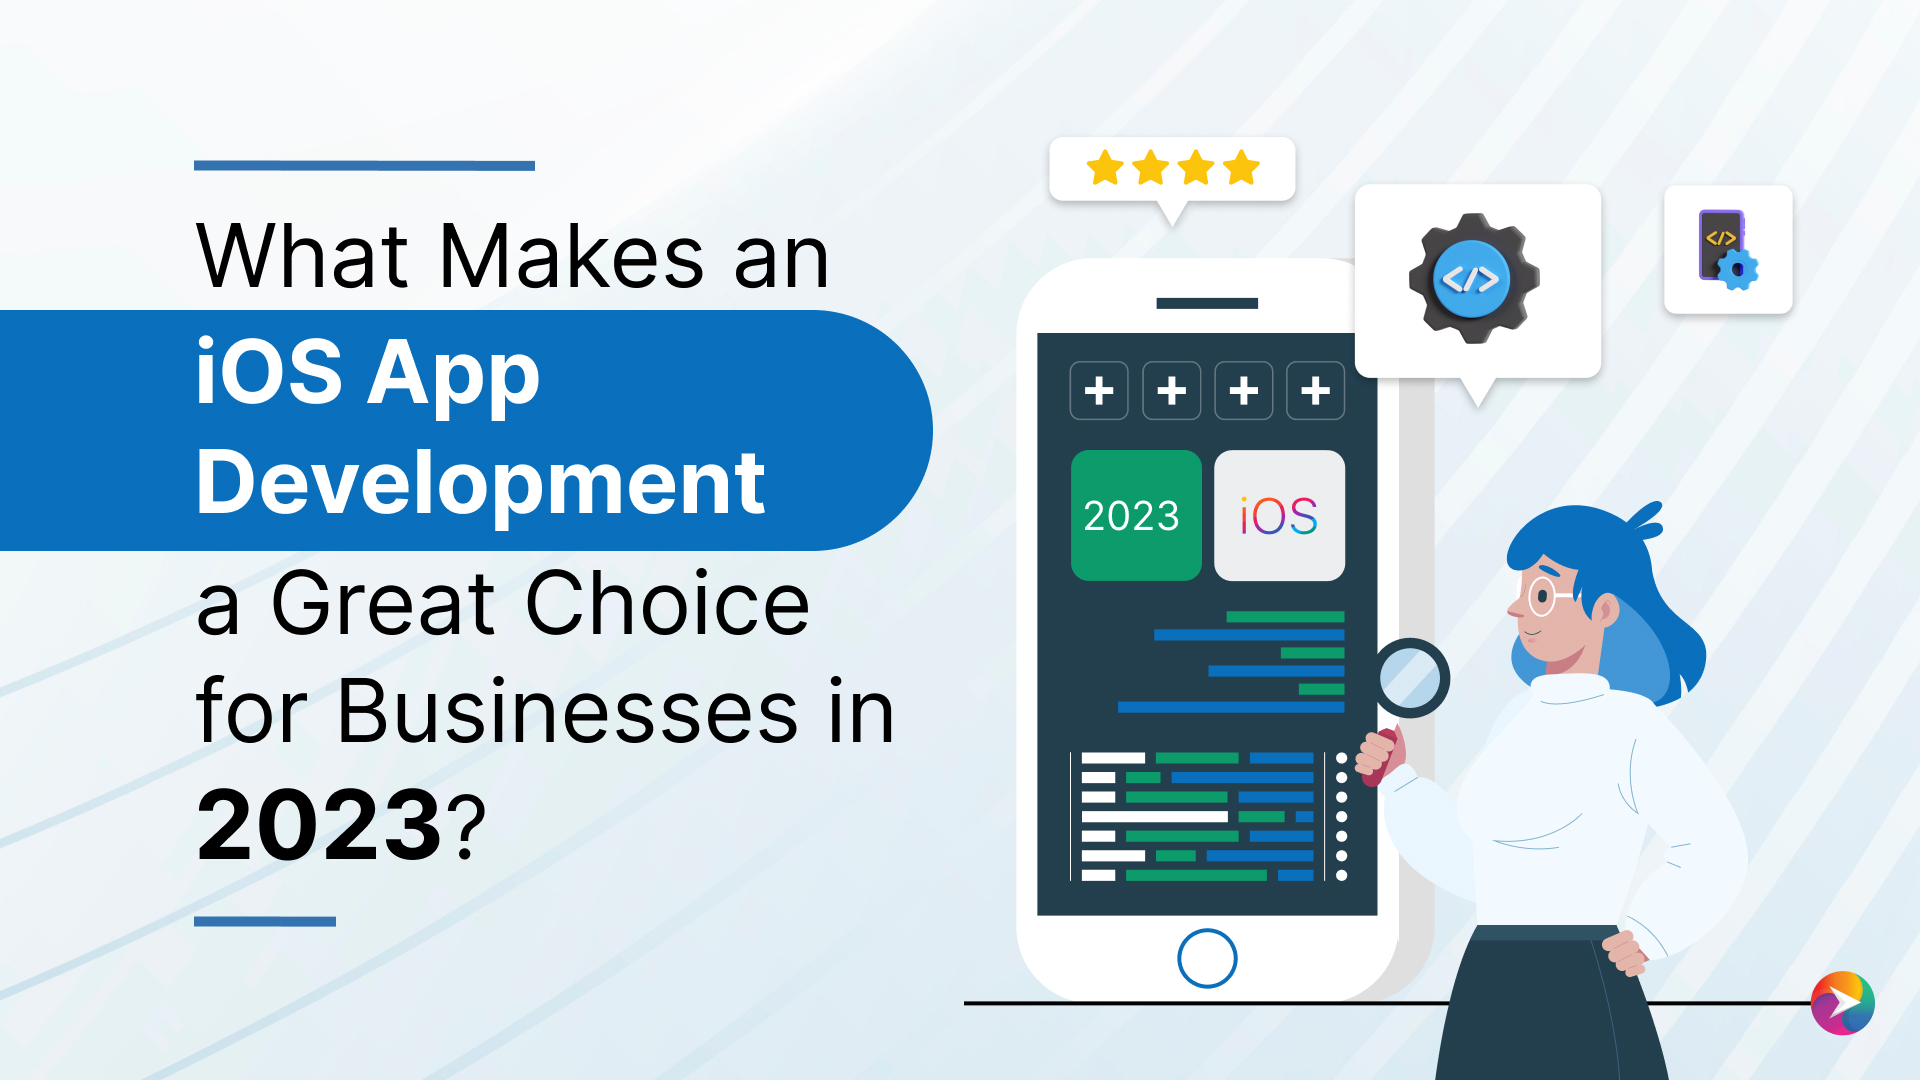 iOS App Development a Great Choice for Businesses in 2023